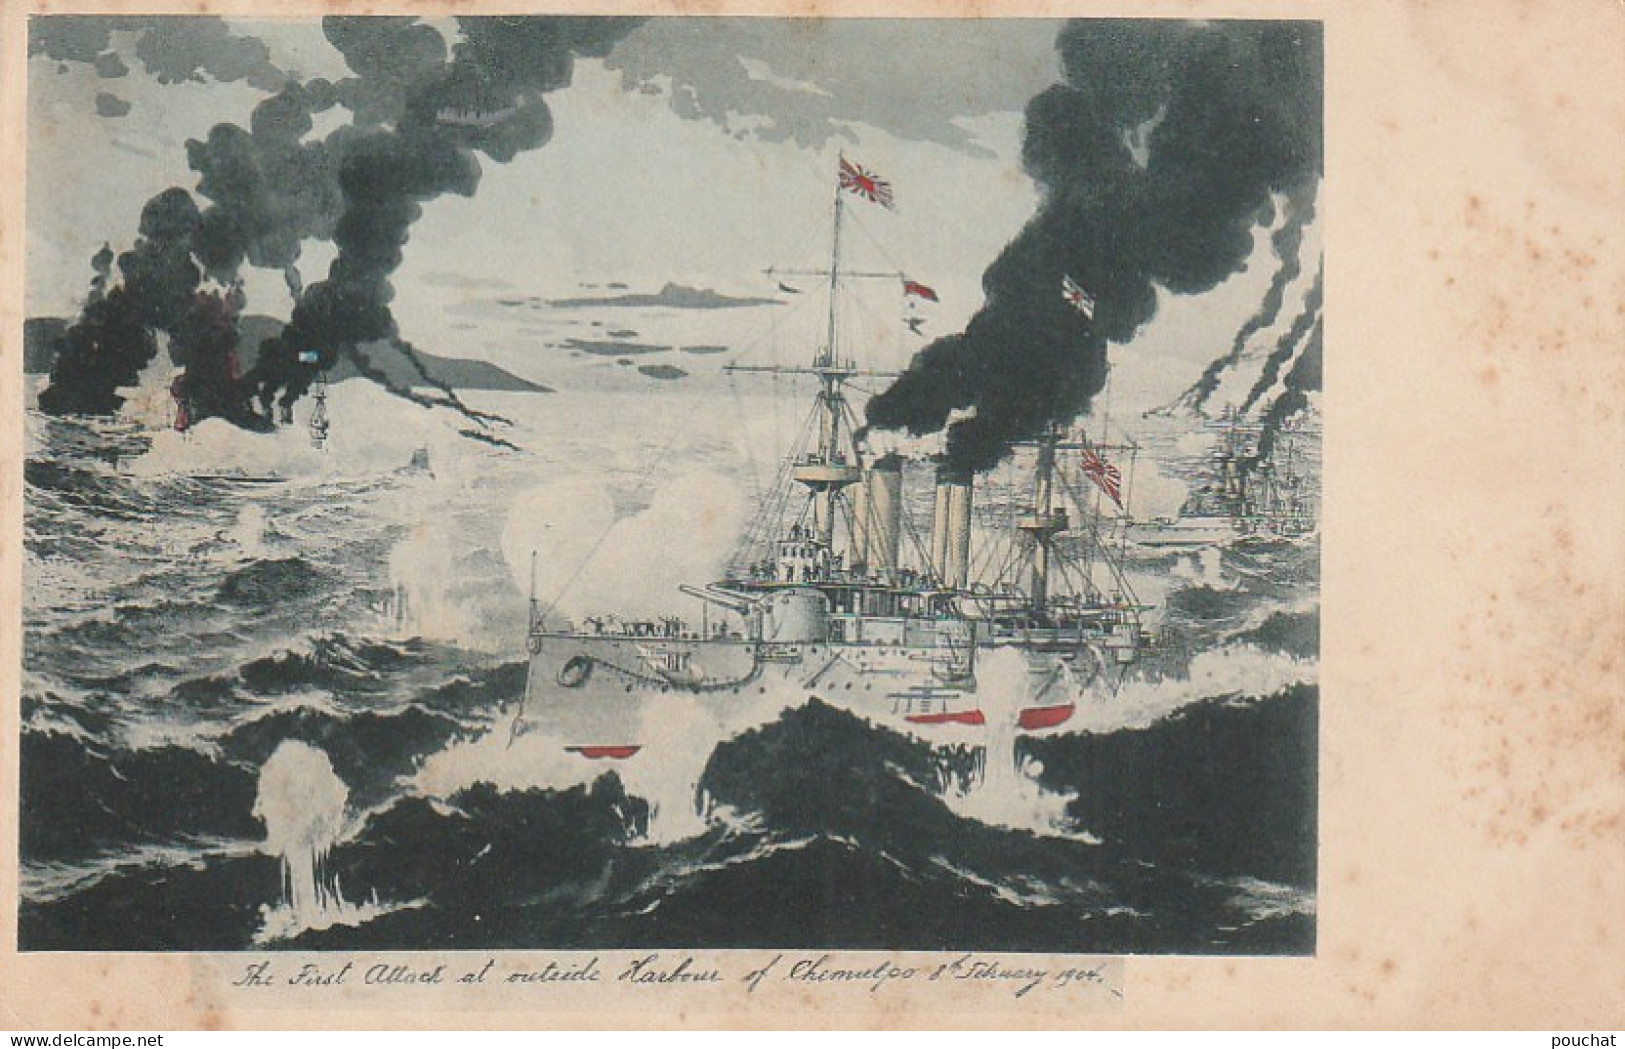 VE 24- THE FIRST ATTACK AT OUTSIDE HARBOUR OF CHEMULPO ( FEVRIER 1904) - ATTAQUE  PORT DE CHEMULPO - ILLUSTRATEUR  - Andere Kriege